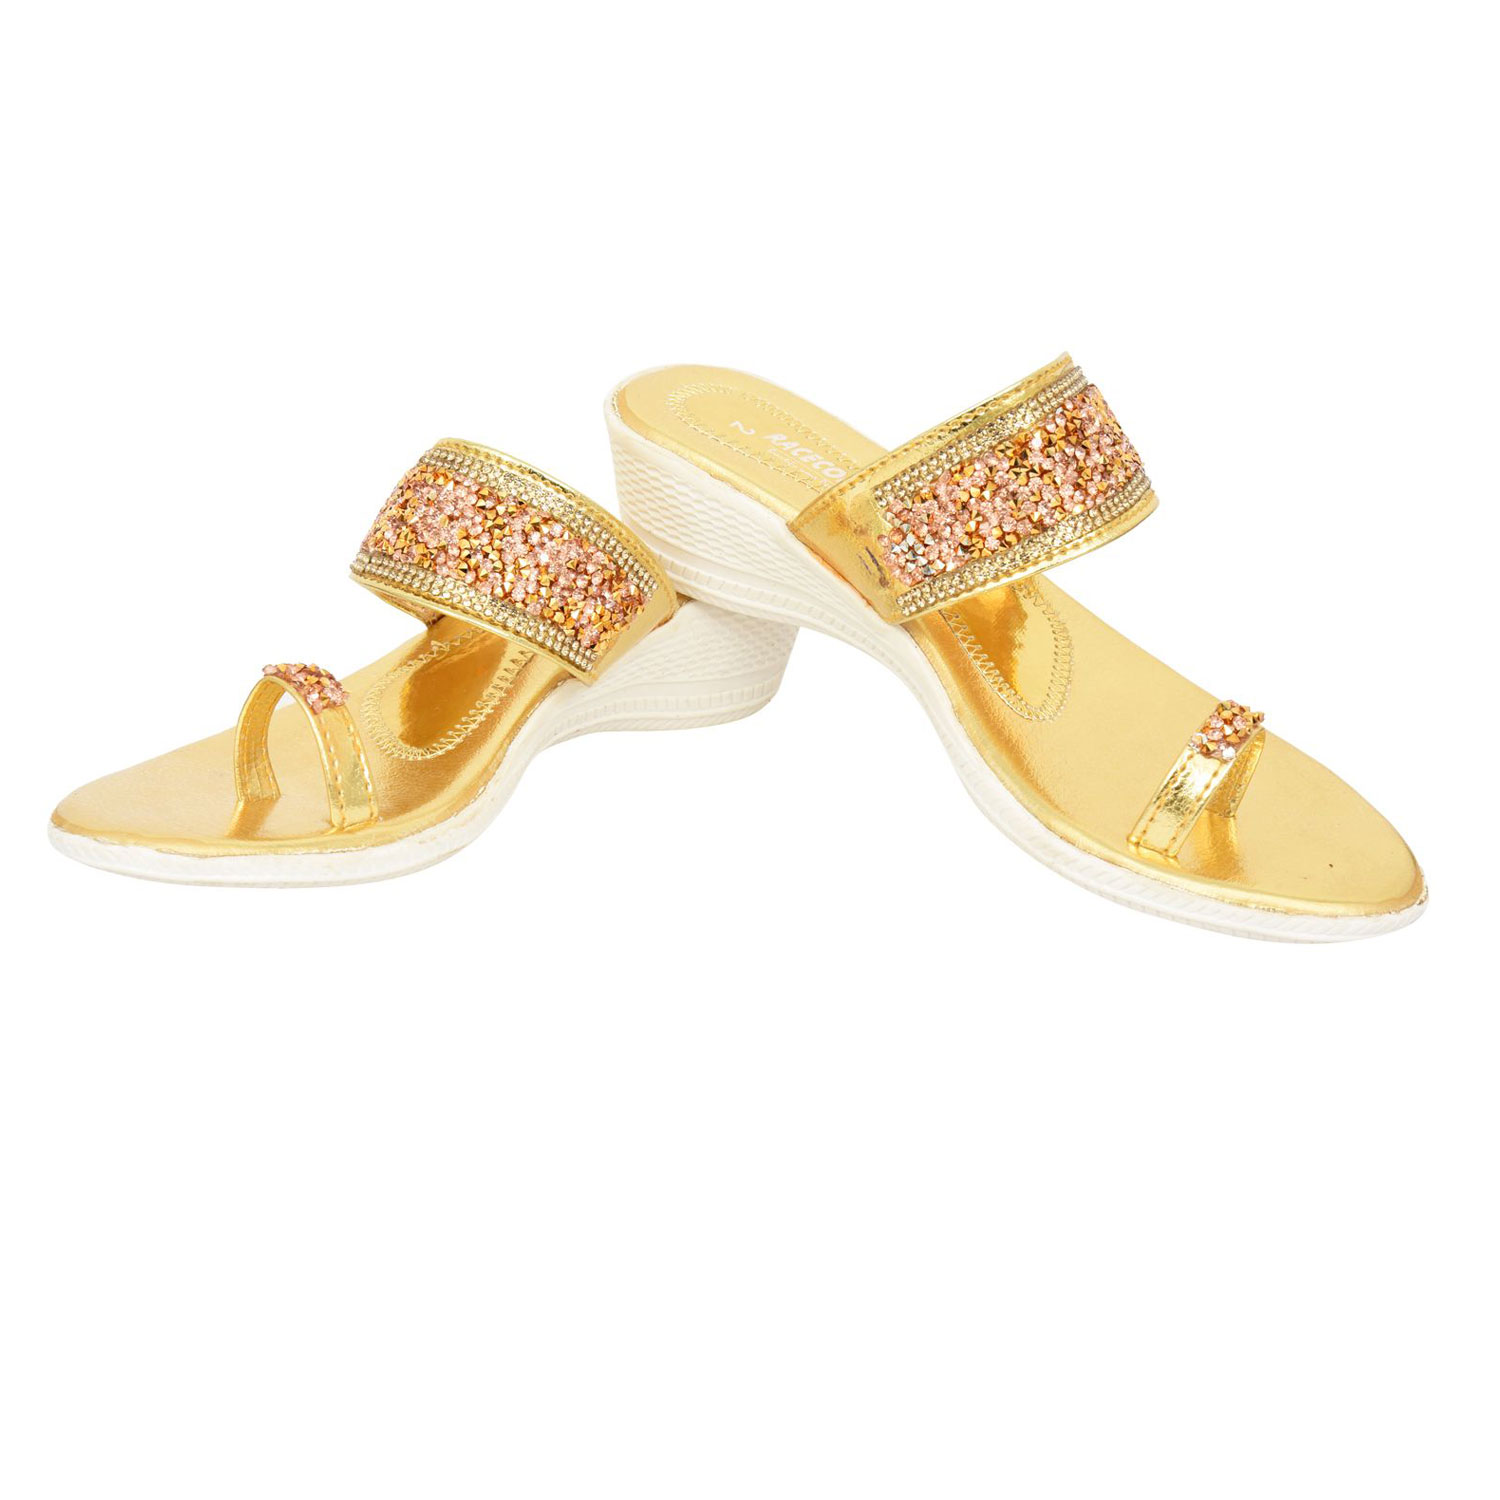 Racecourse Girl's Wedges Heel Ready Made China Upper Kadak Panja Partywear Sandal With the Heel Height of 1.5 Inch 3002 Golden(Pack of 8)